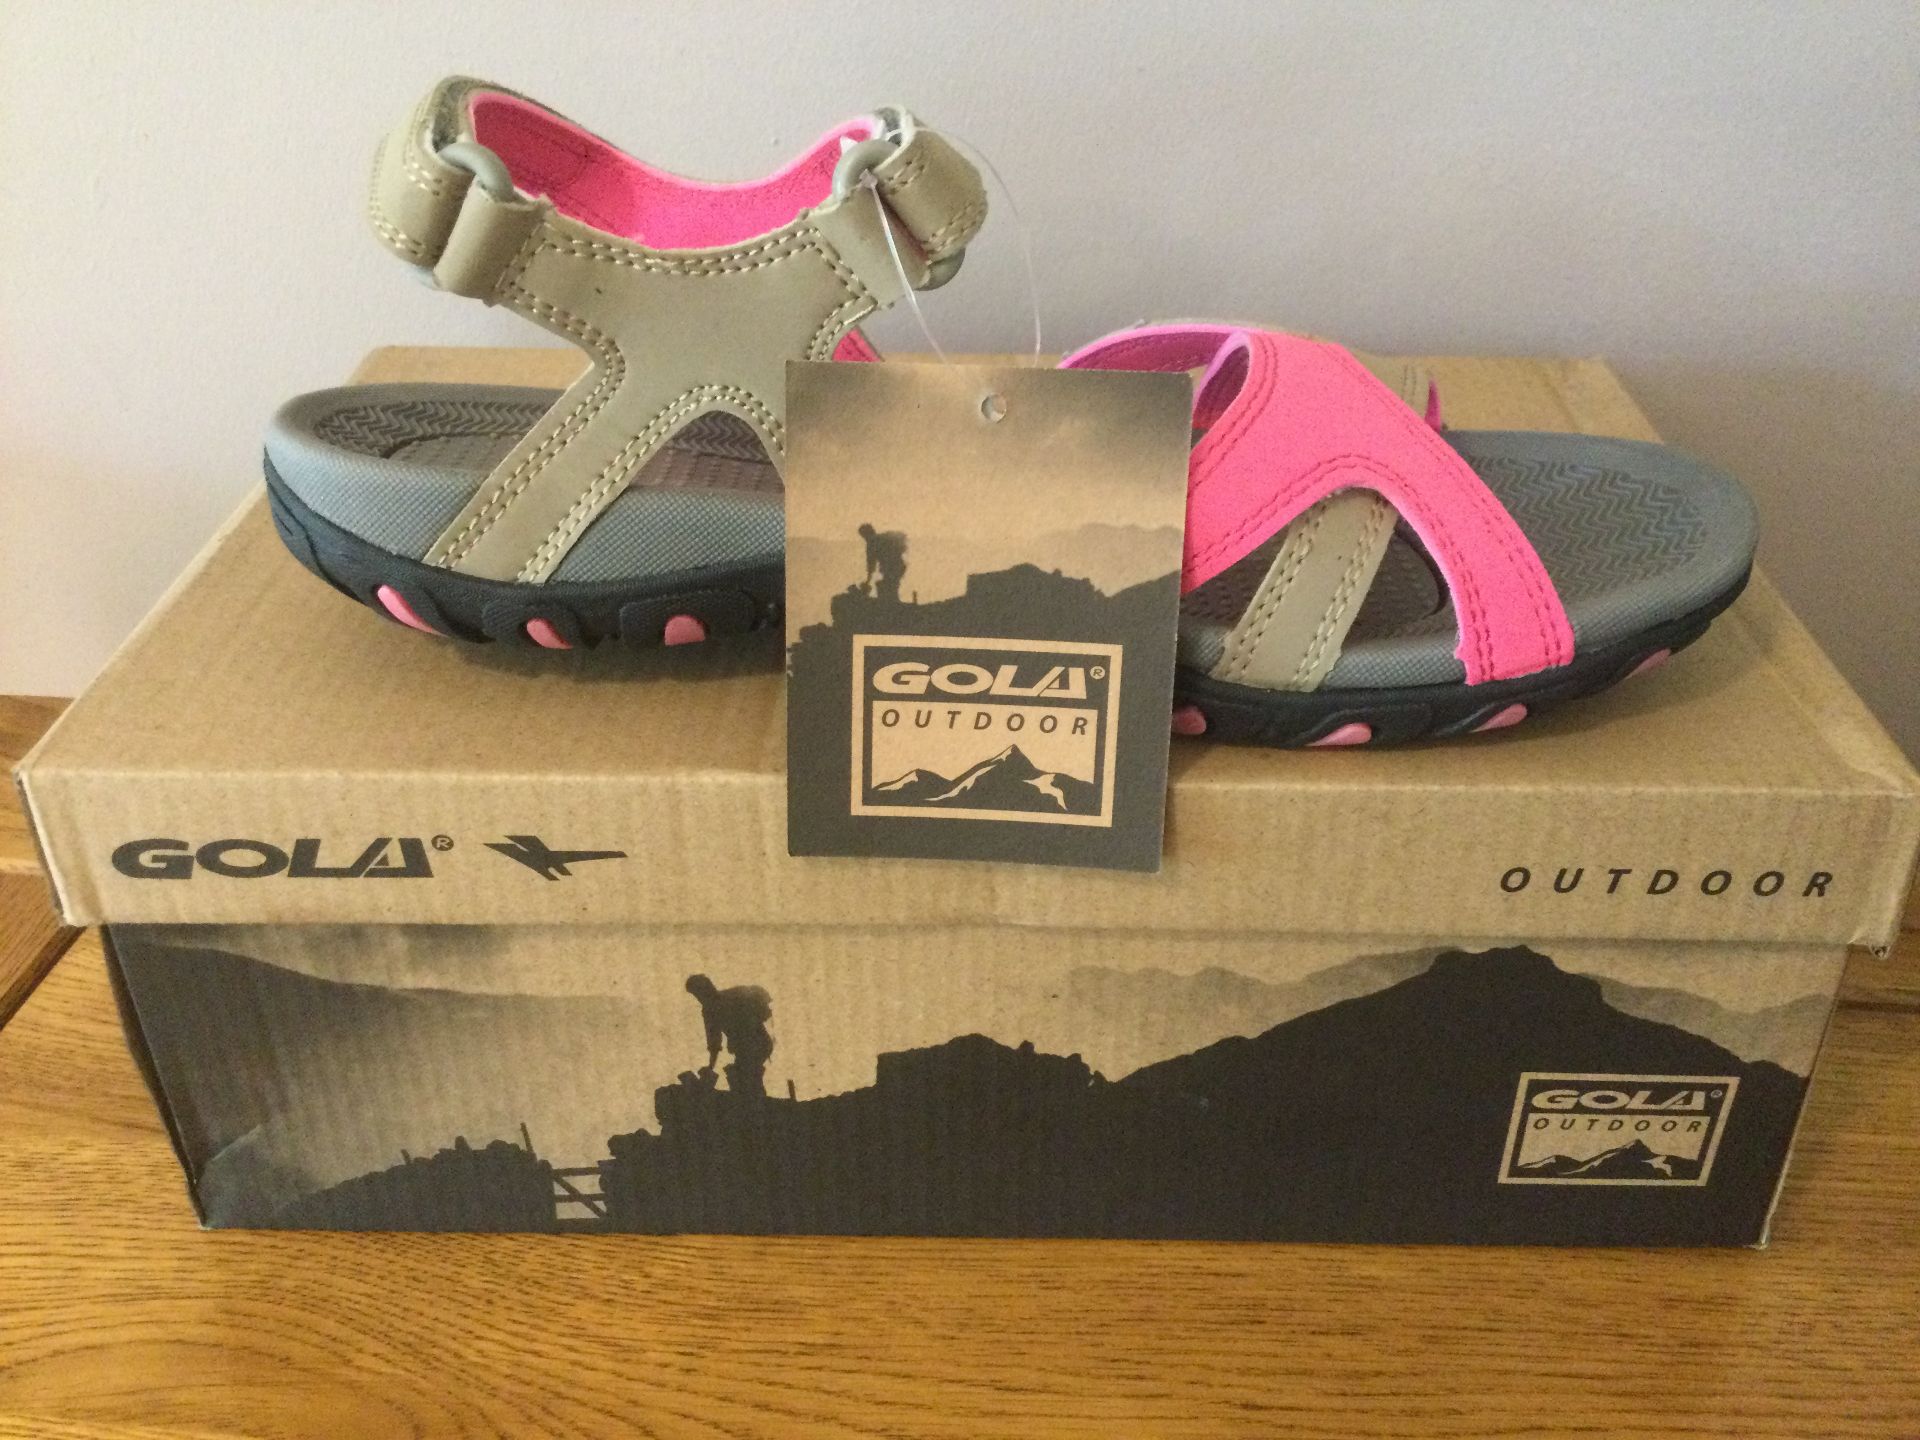 Gola Women's “Cedar” Hiking Sandals, Taupe/Hot Pink, Size 4 - Brand New - Image 2 of 4